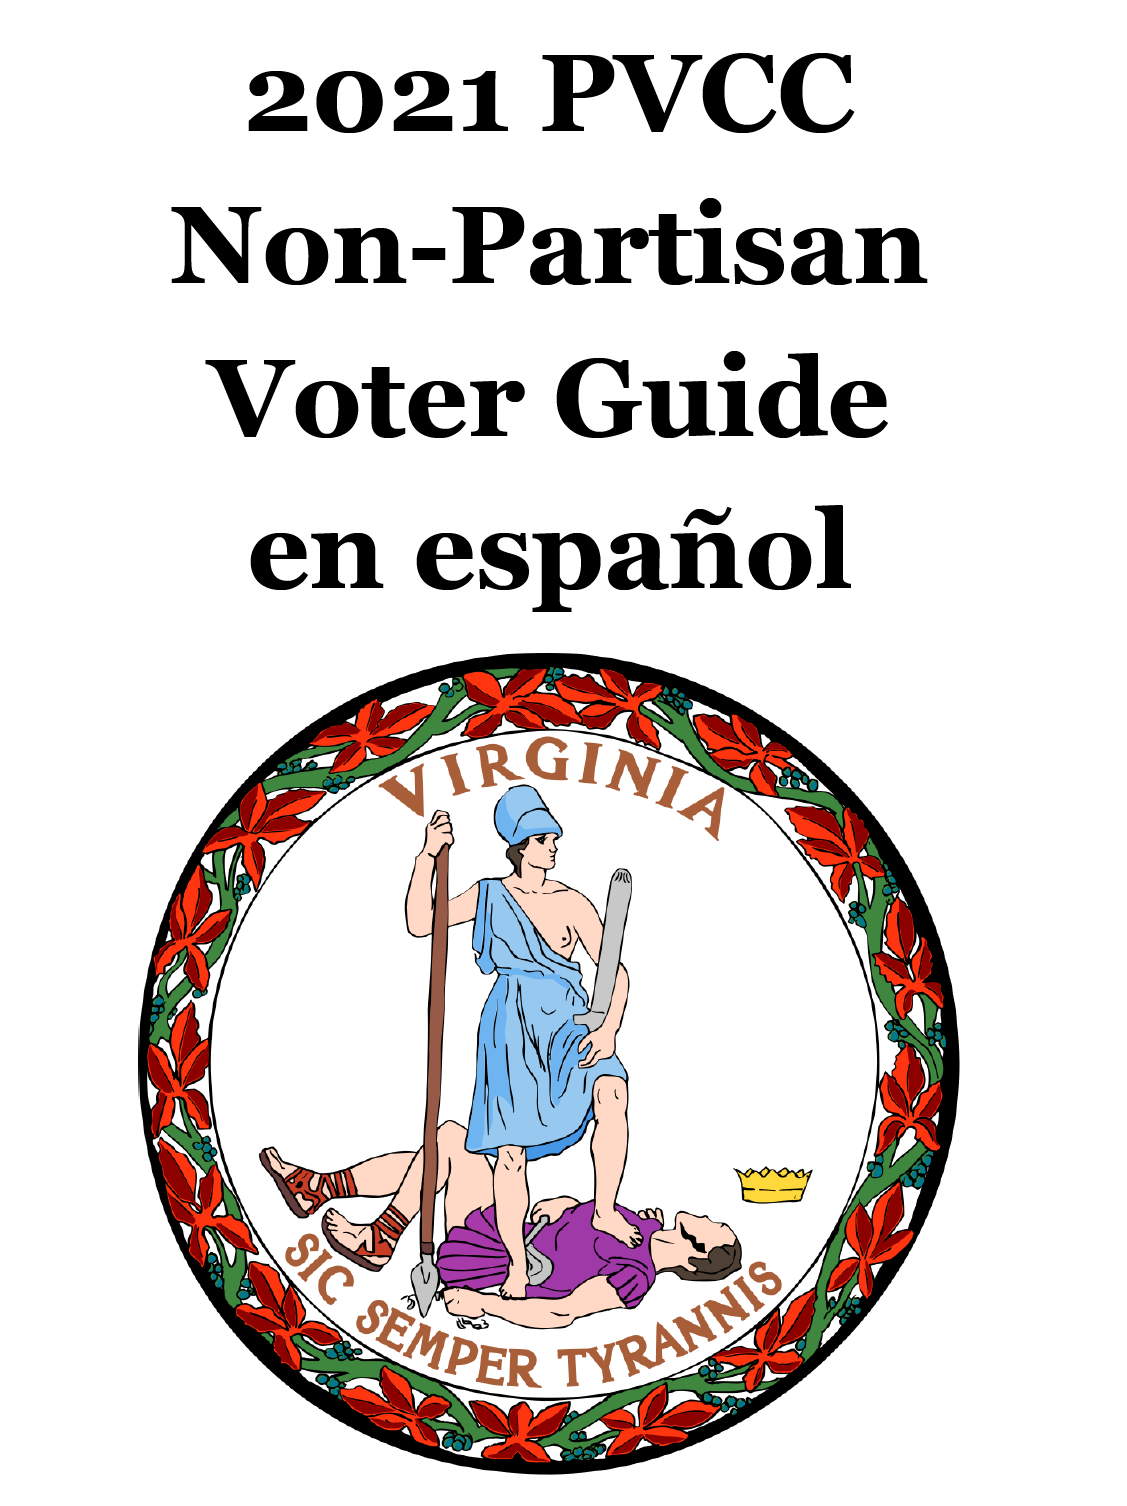 The cover of the 2021 PVCC Non-Partisan Voter Guide in Spanish